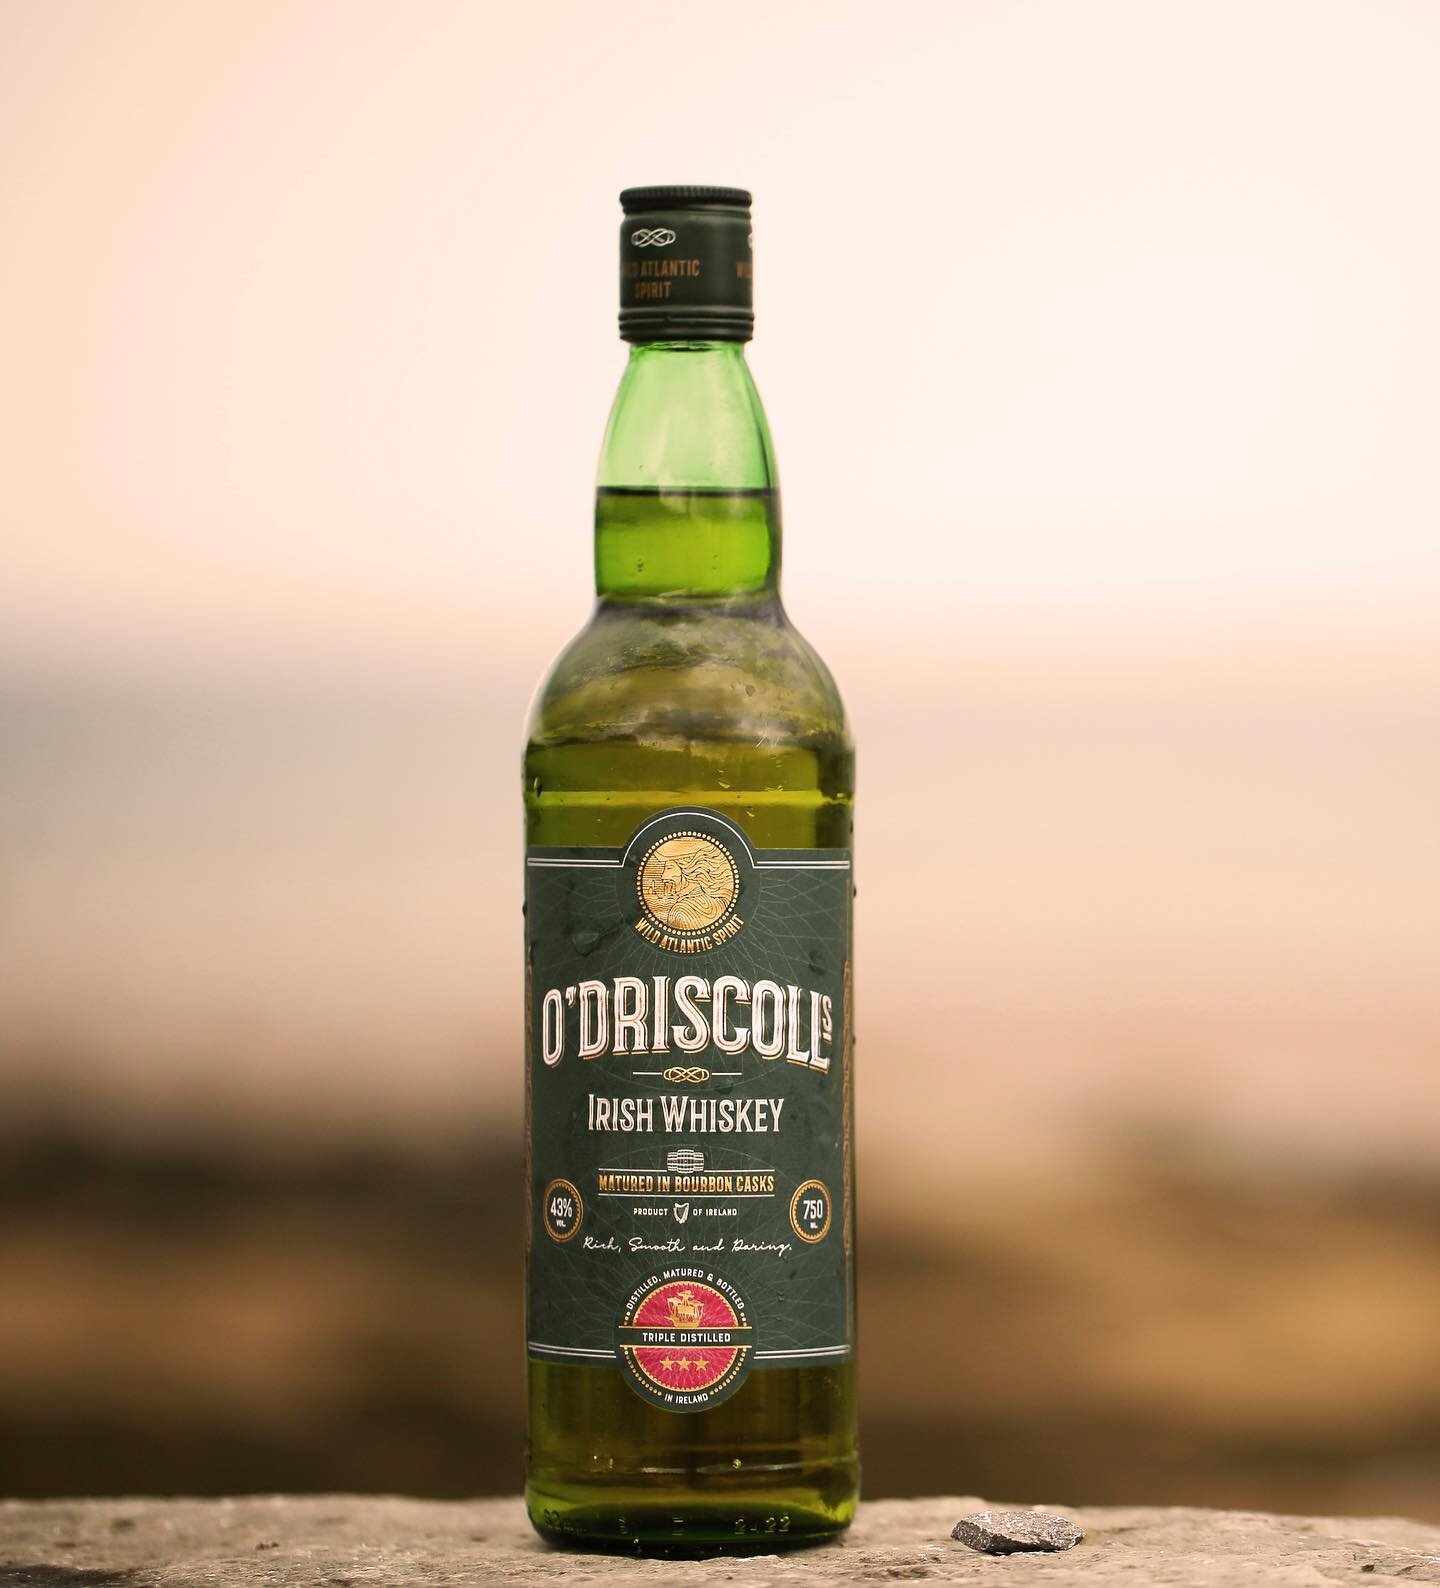 Push boundaries. Take a new direction. Celebrate what you&rsquo;ve done and find what you&rsquo;re truly capable of.
.
.
.
#irishwhiskey #pushboundaries #tasteodriscolls #whiskeytime #sipwisely #odriscollsirishwhiskey